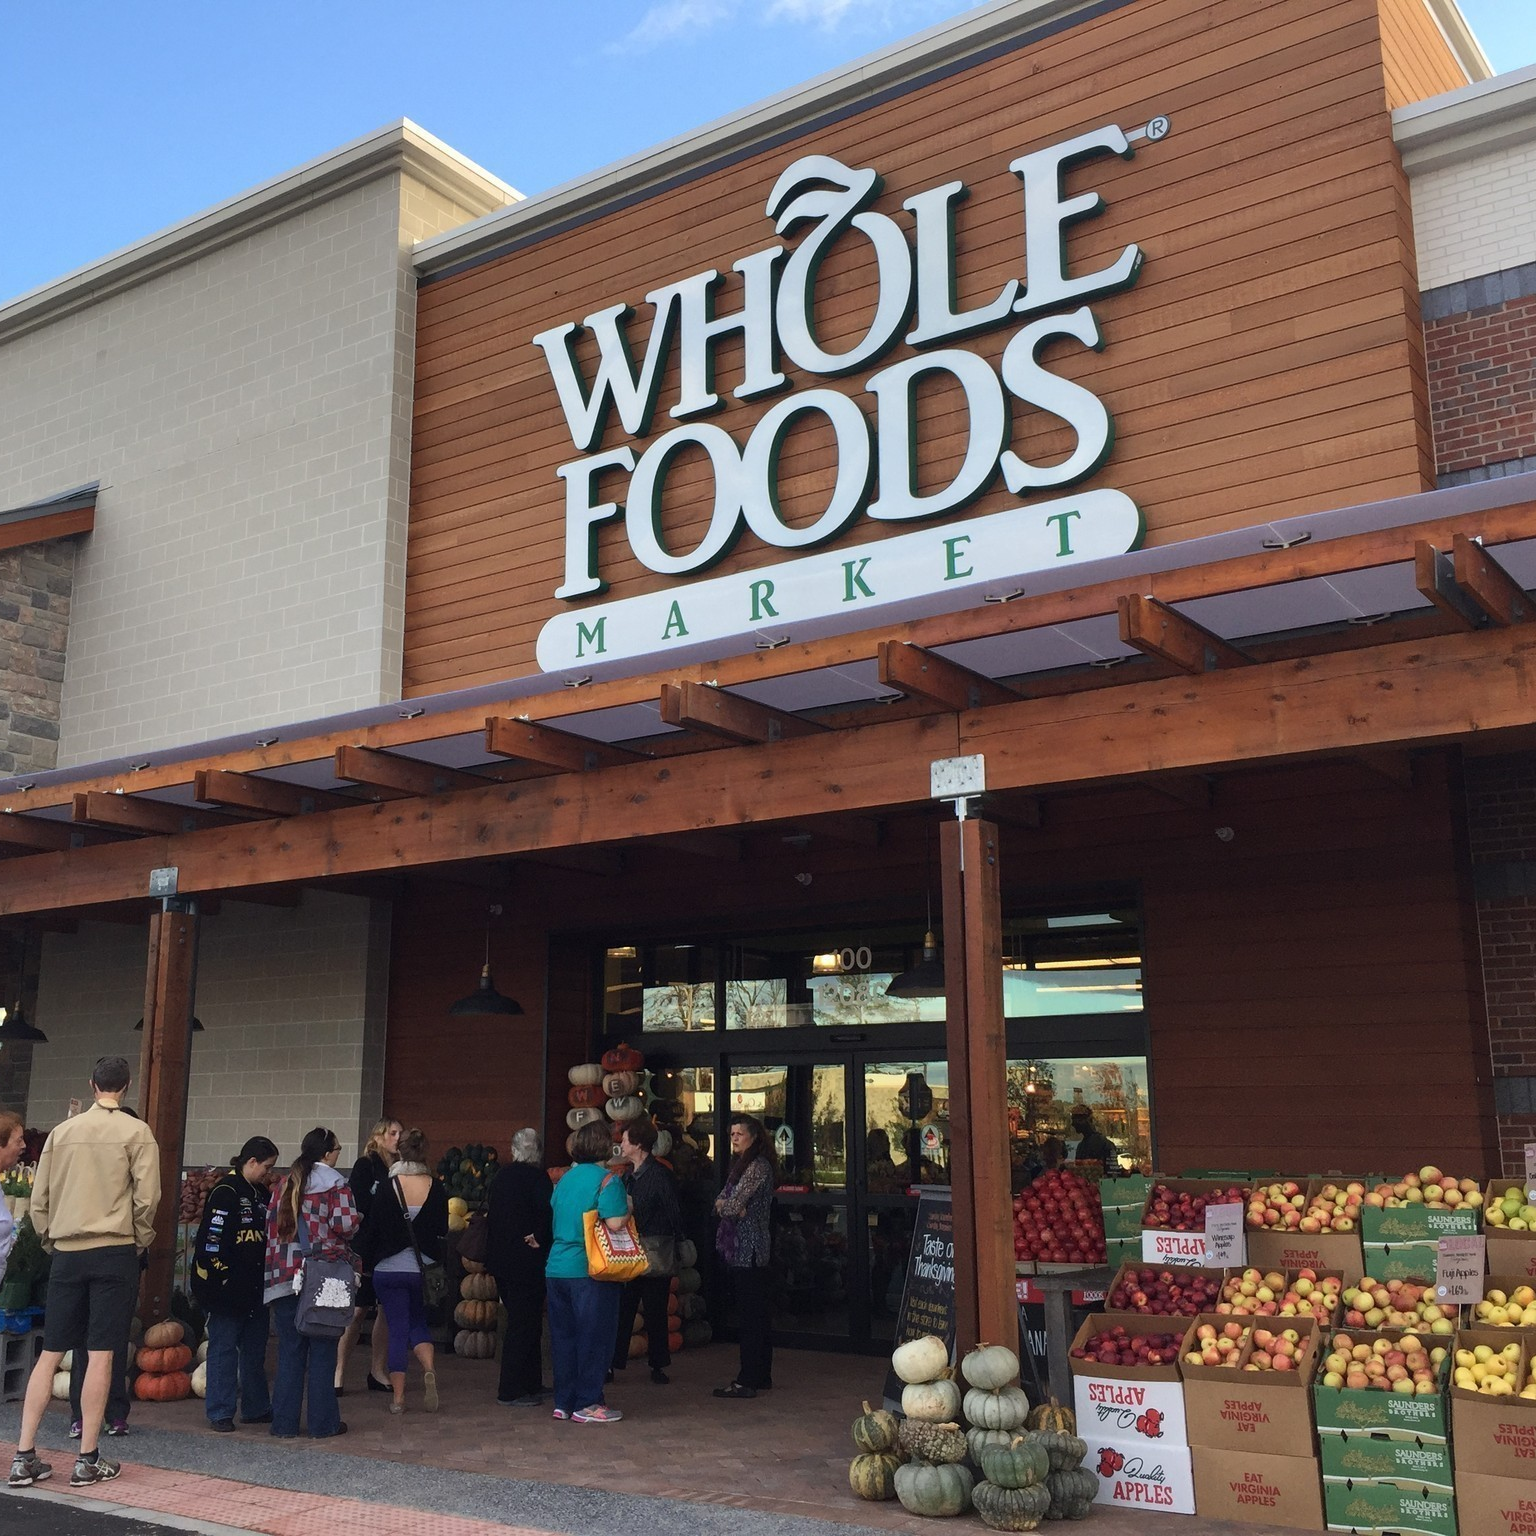 Save $5 Off Your $20 Purchase at Whole Foods Market – FREE Groceries!